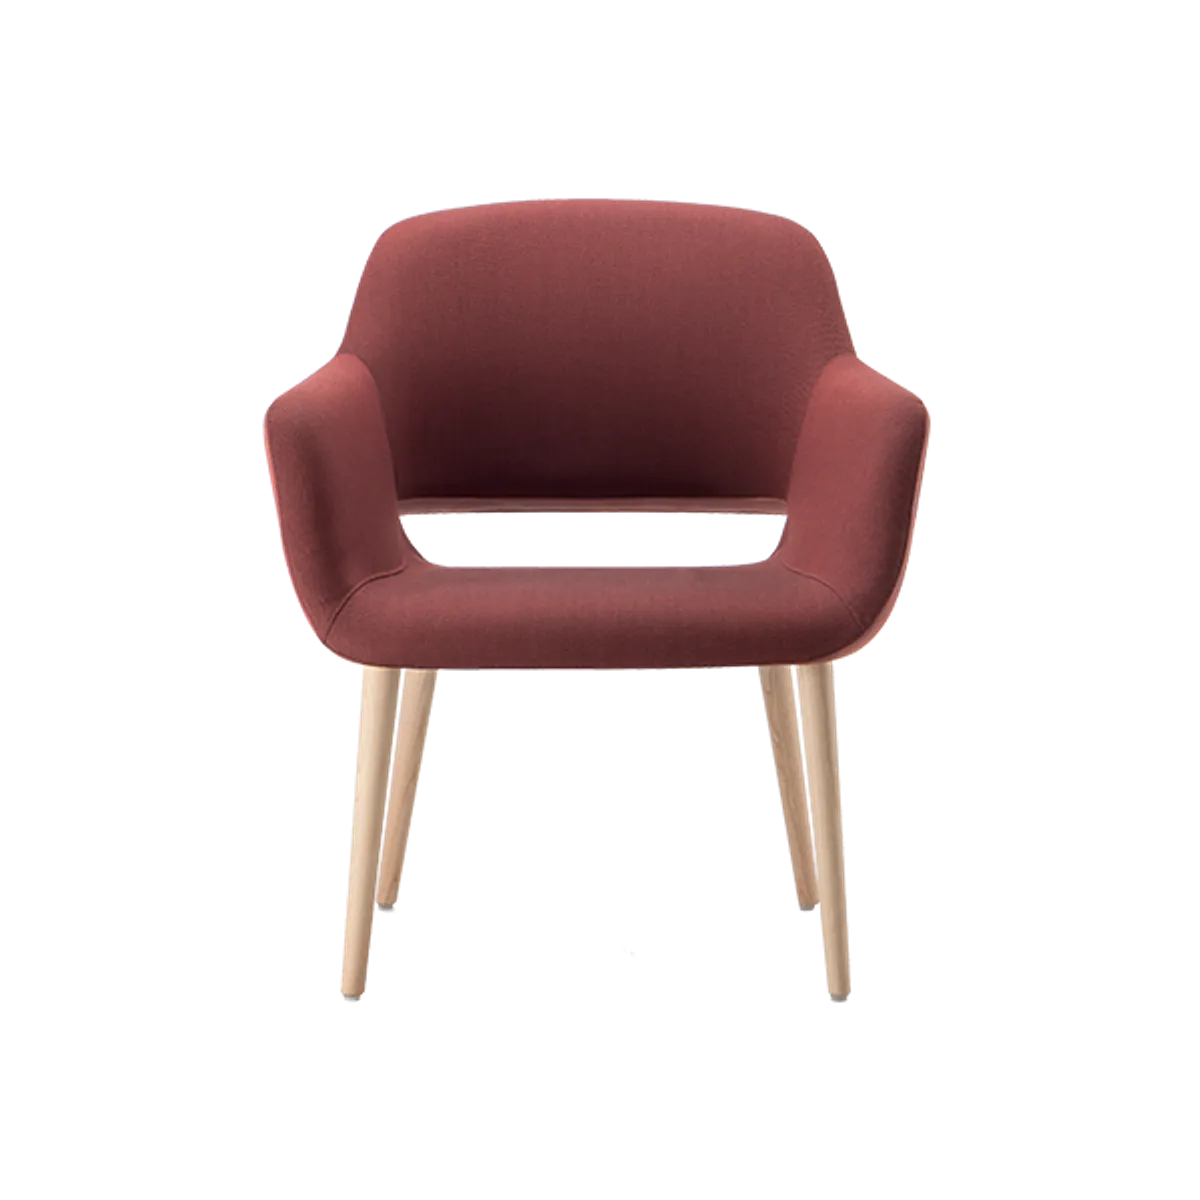 Web Somers Lounge Chair